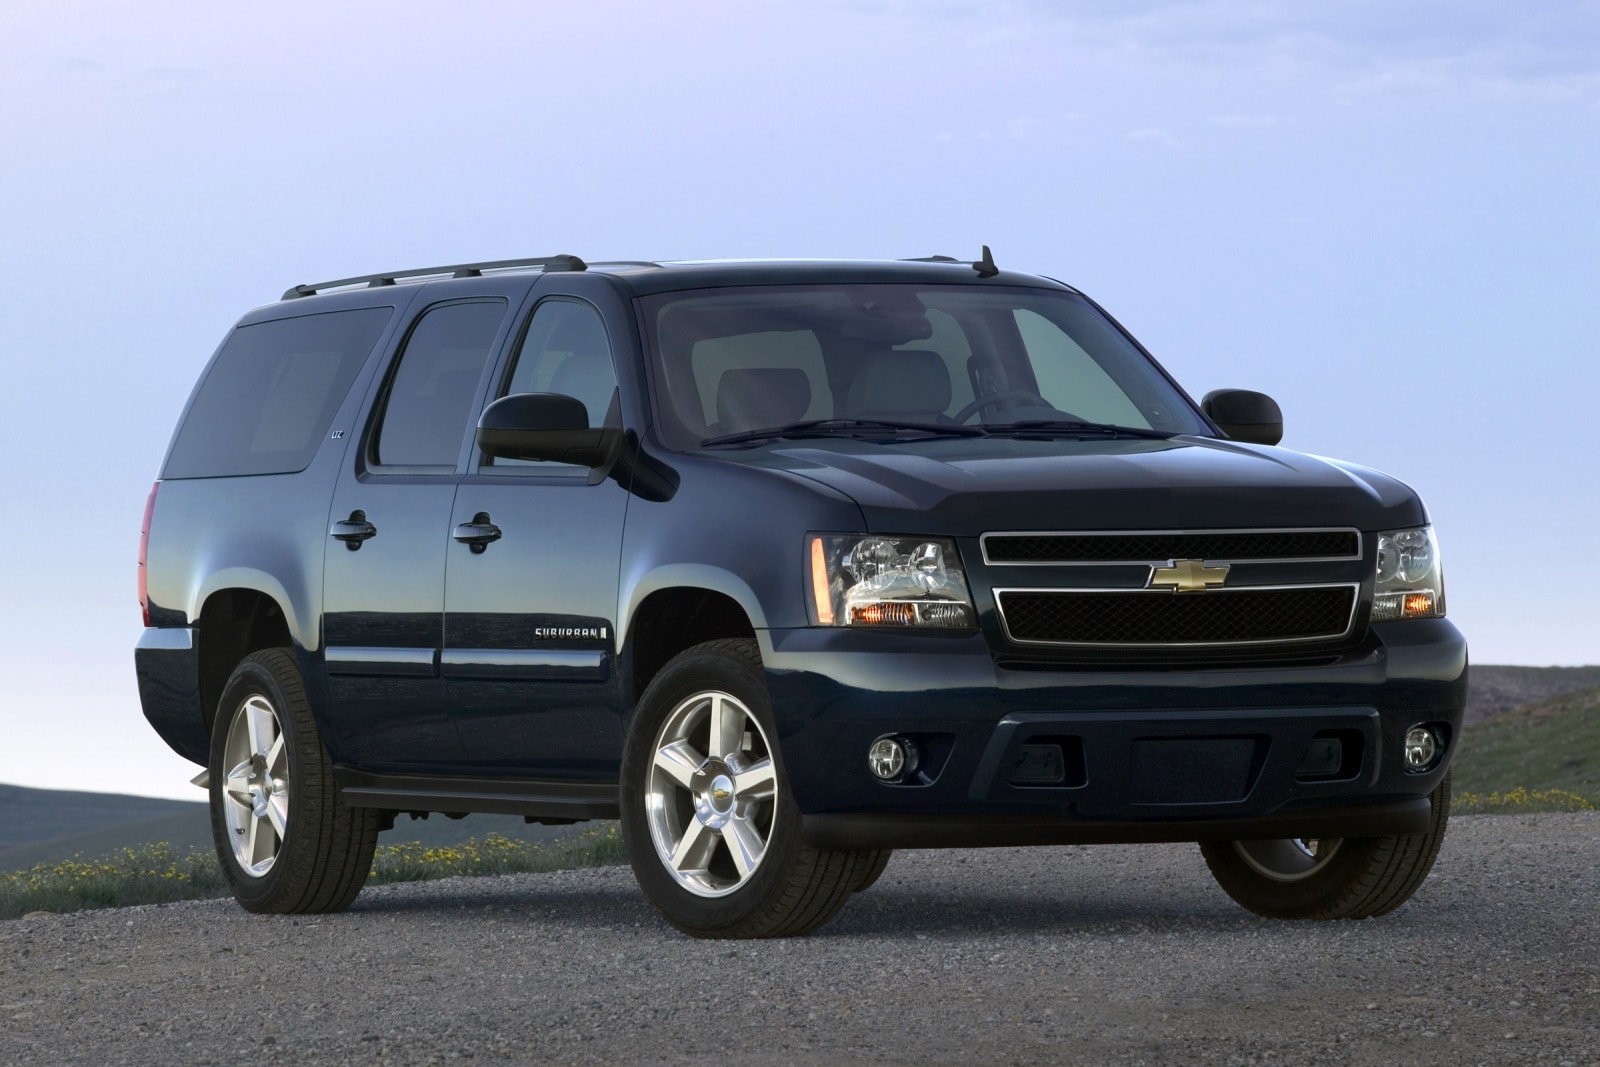 2010 Chevy Suburban Review & Ratings | Edmunds